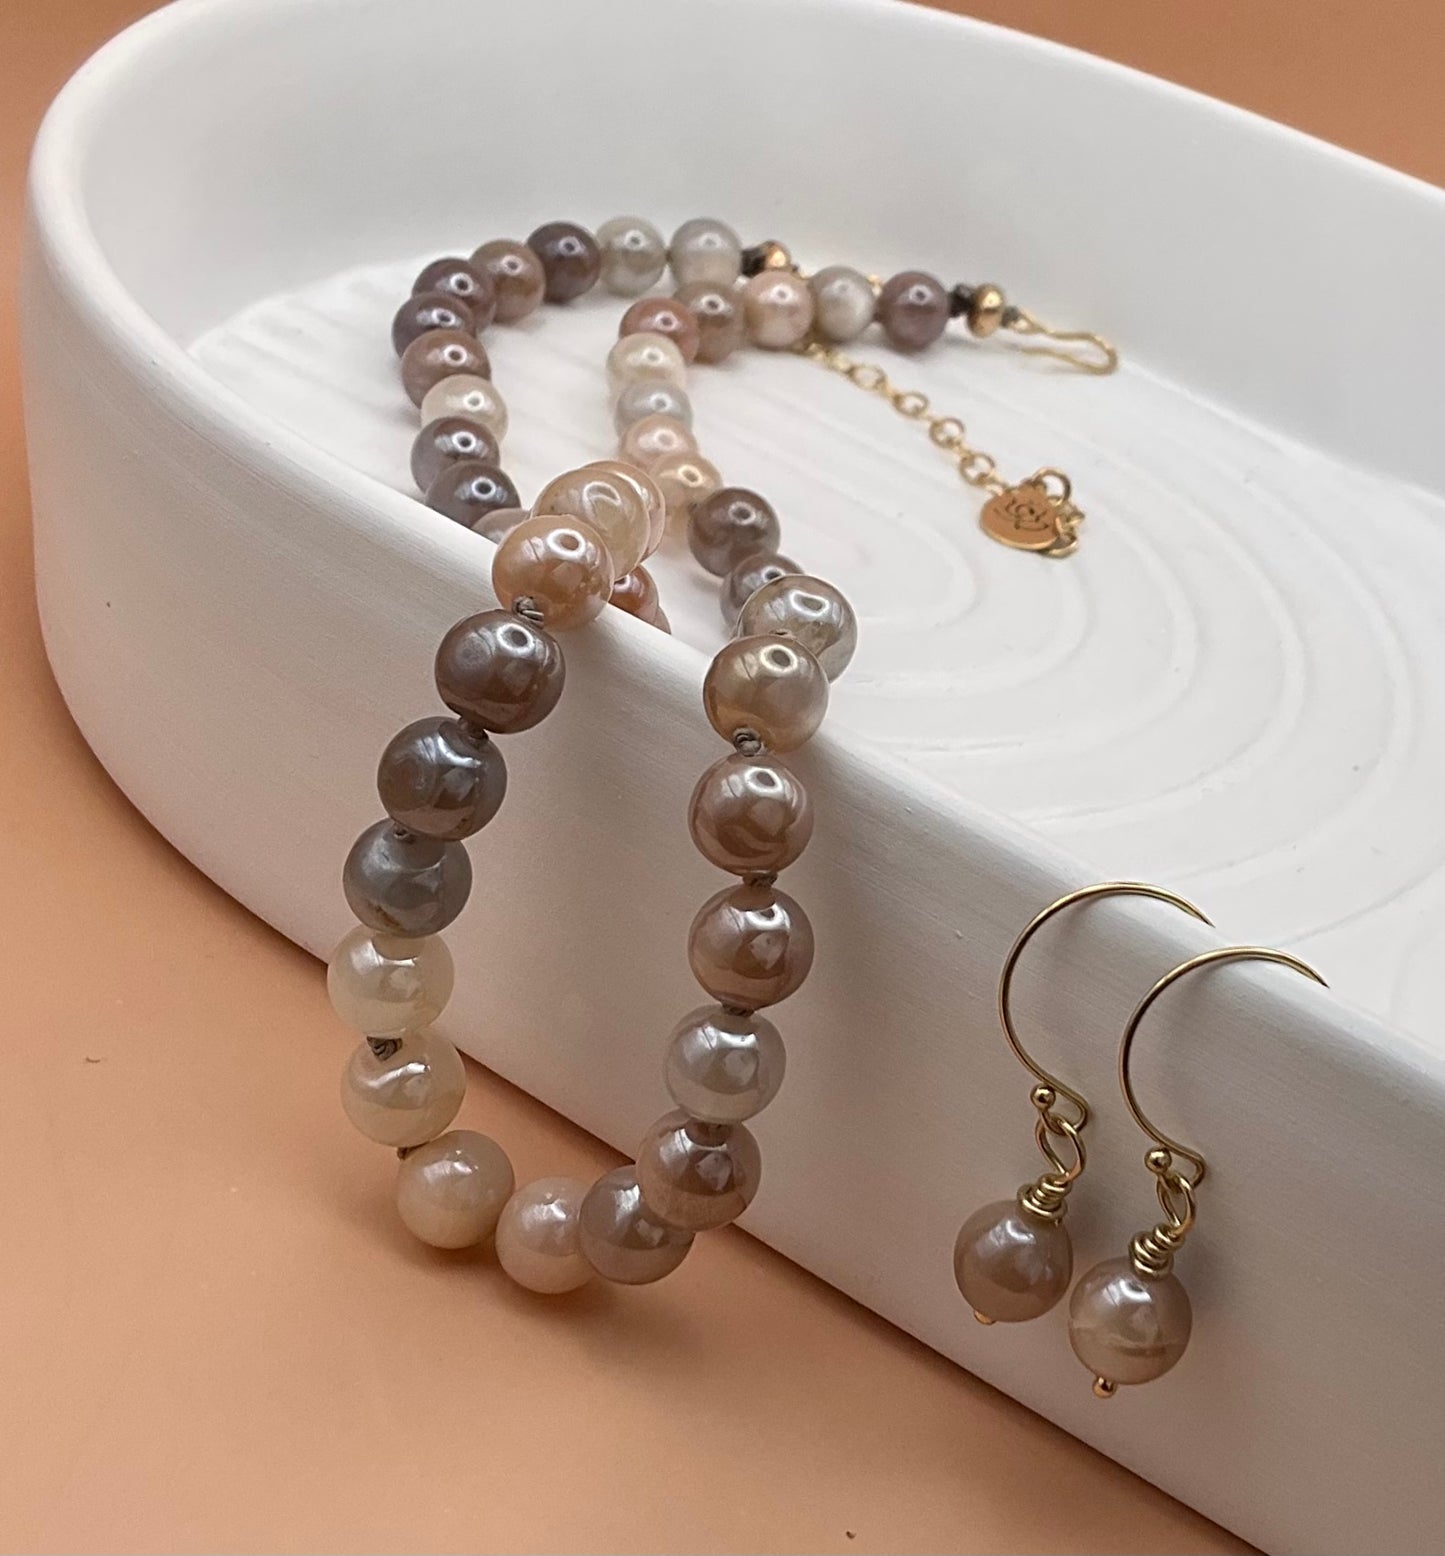 Hand-knotted Peach and Gray Moonstone Necklace with Matching Earrings